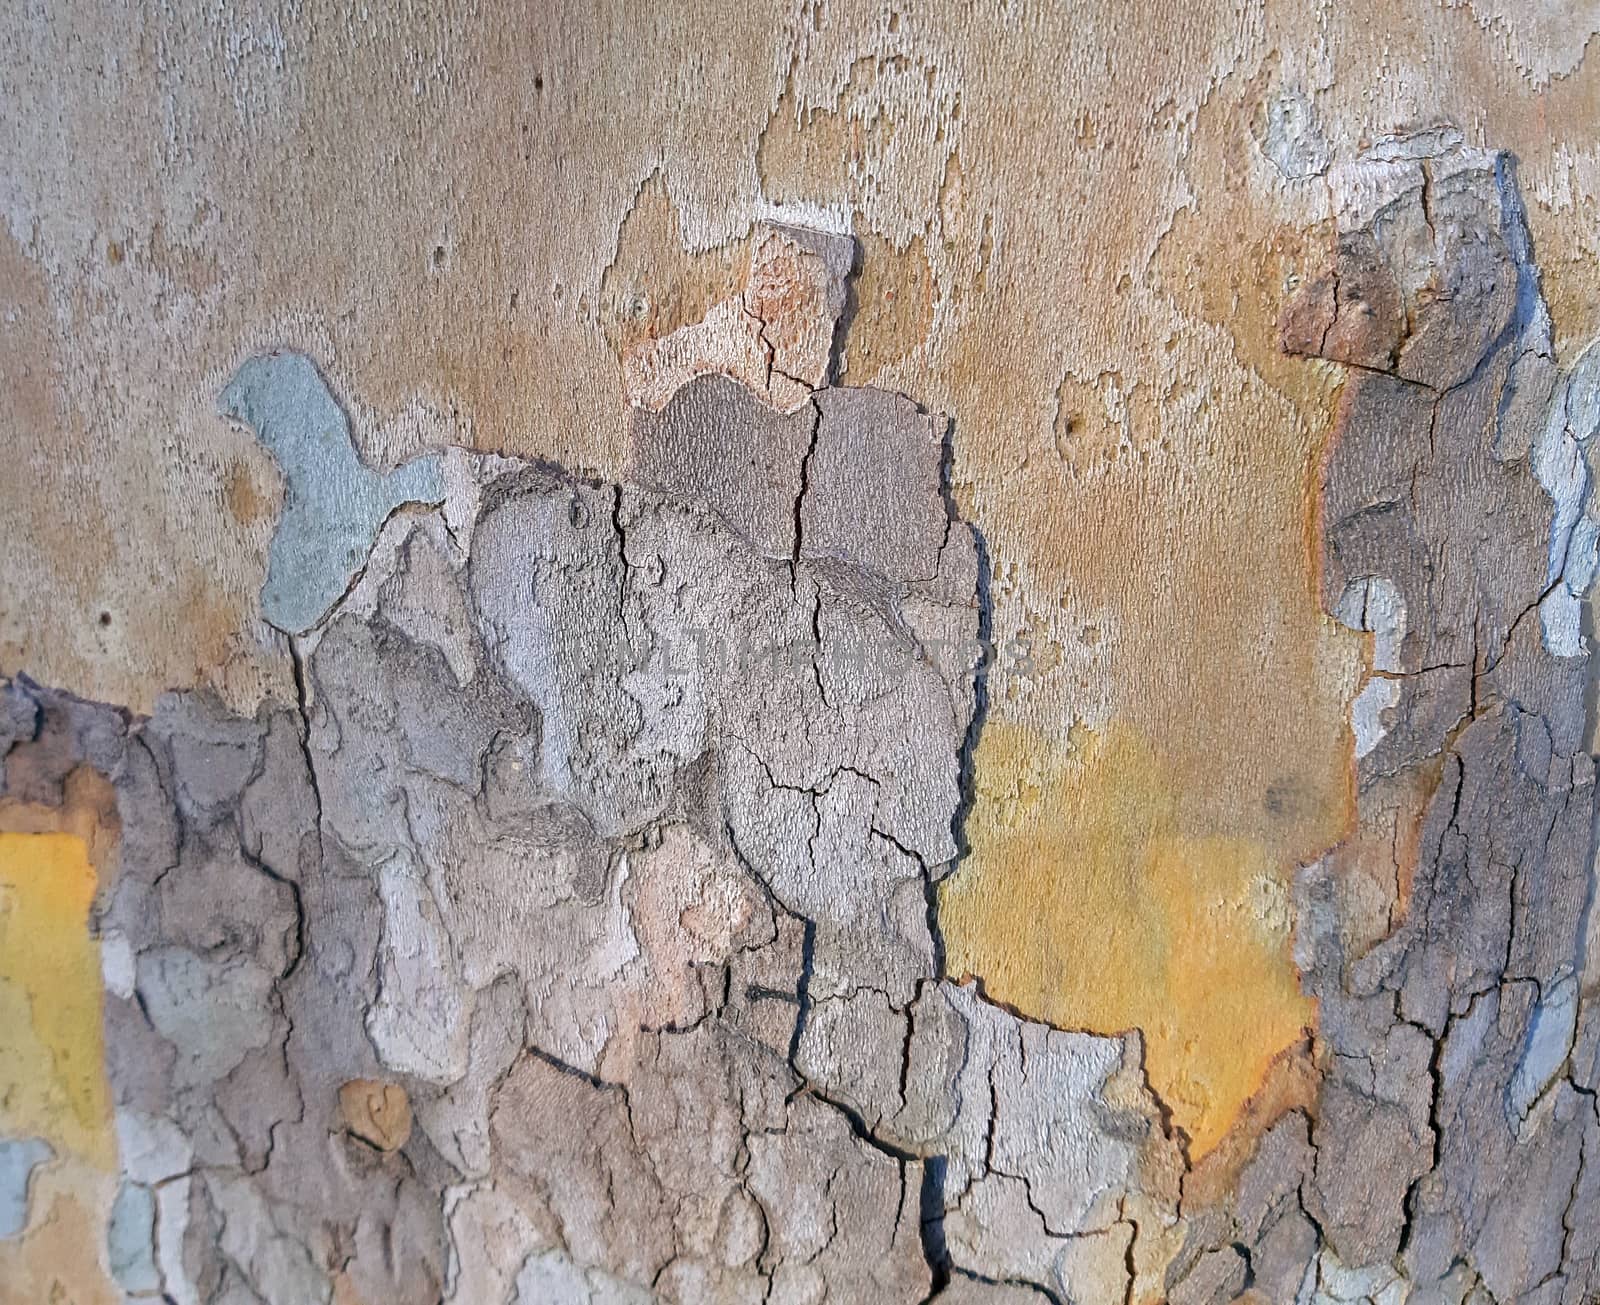 Tree bark texture, close up and colorful by Mindru